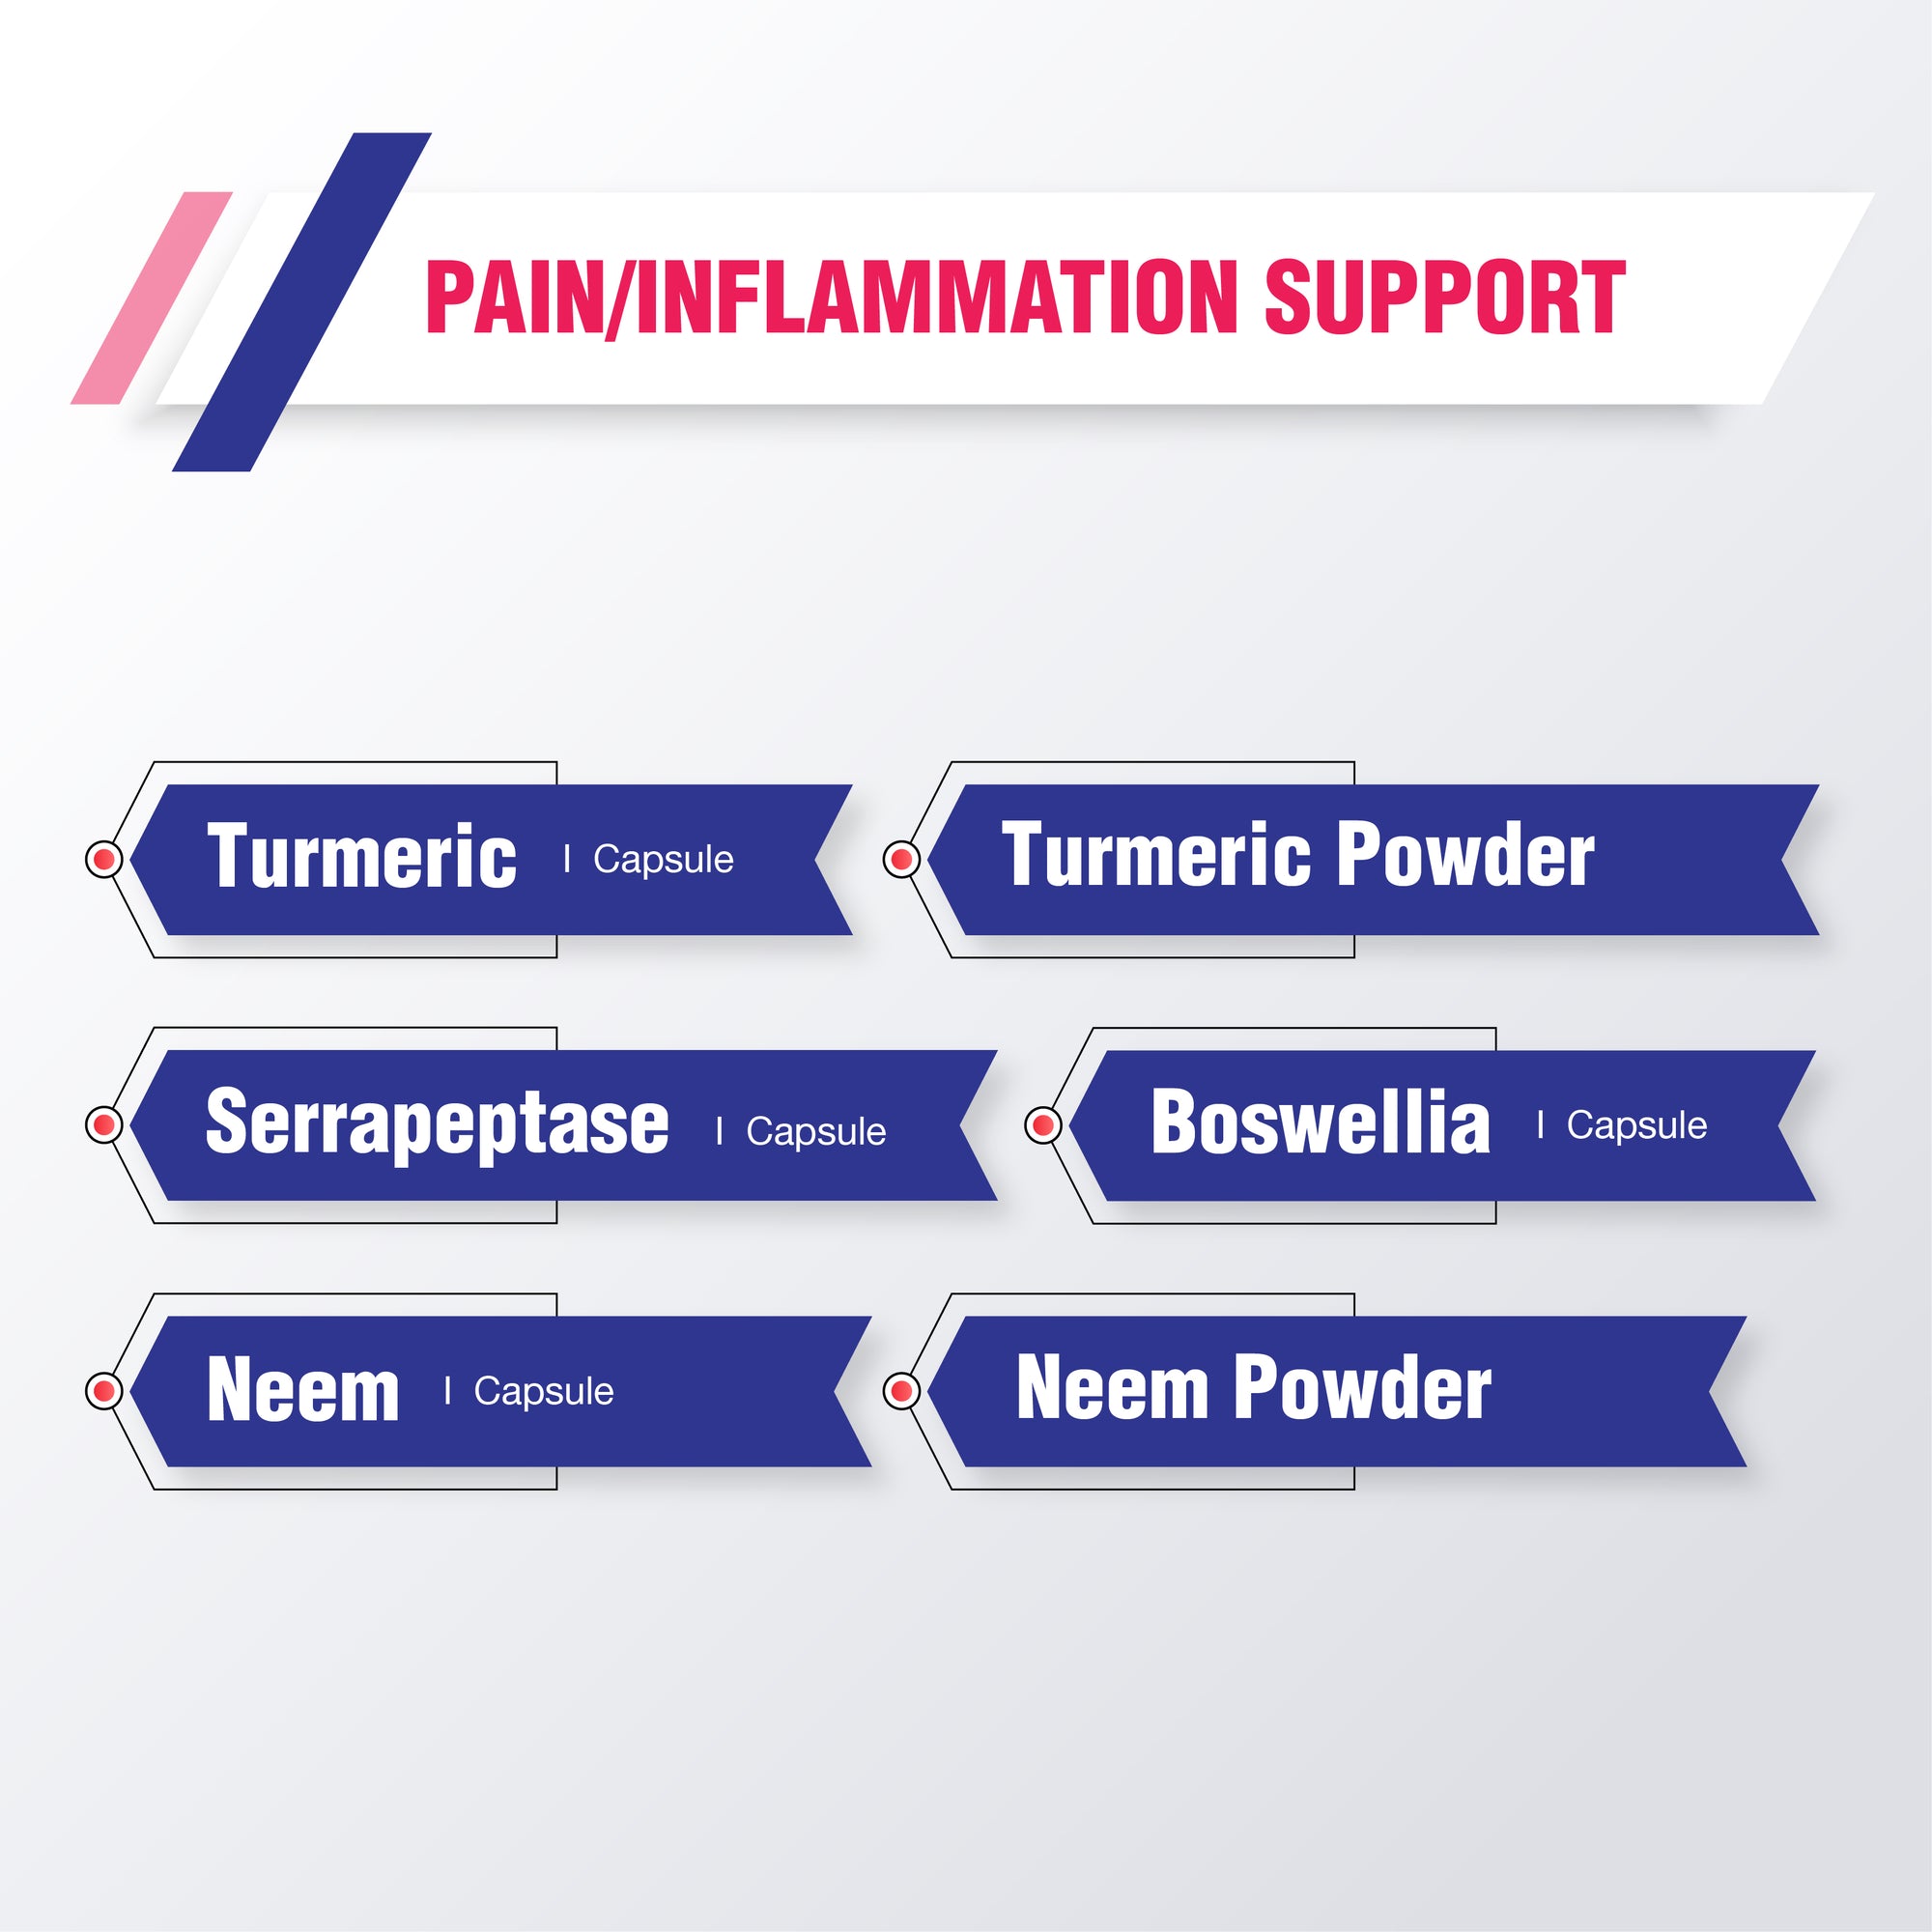 Pain / Inflammation support